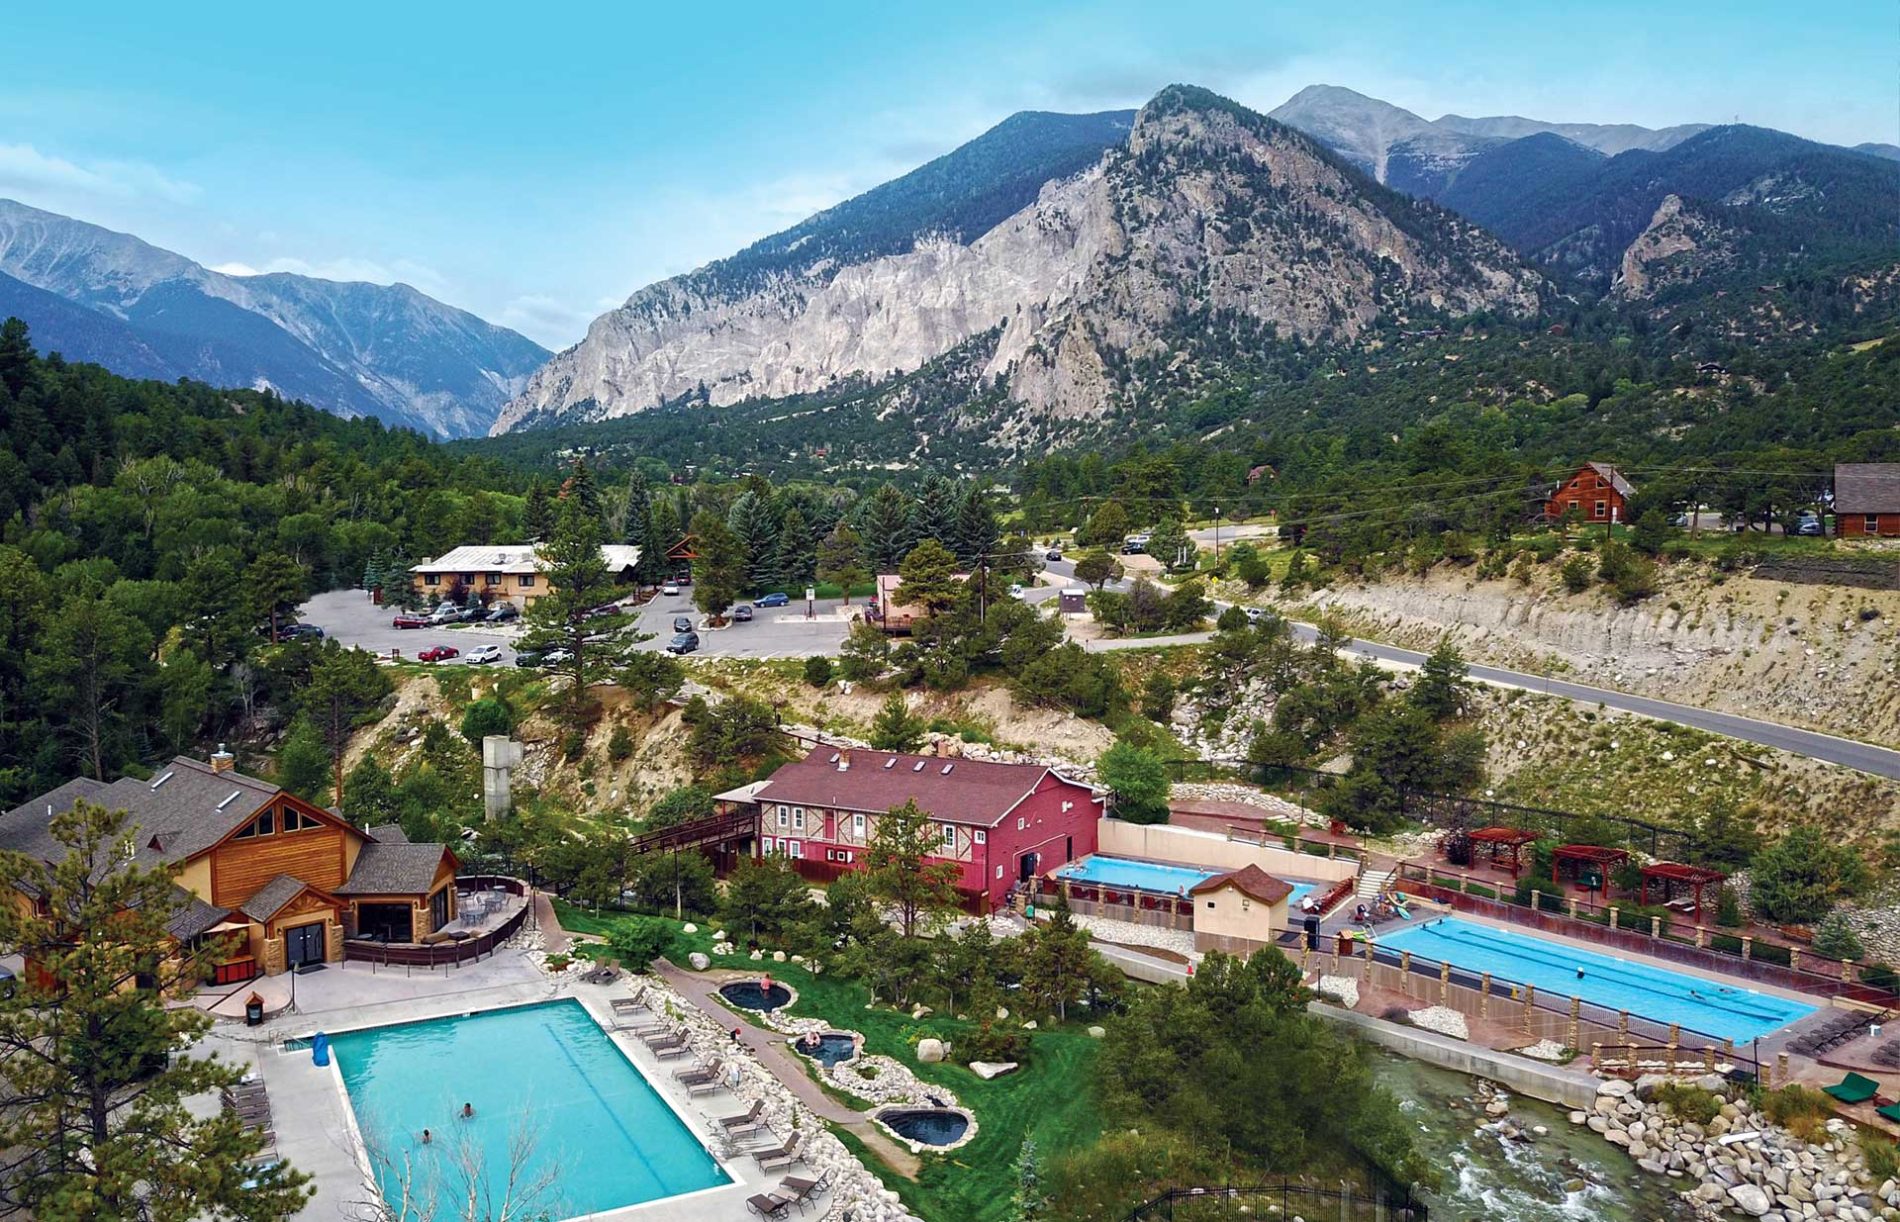 Aerial view of a mountain hot springs resort near Denver with outdoor pools and lodging amidst forested terrain